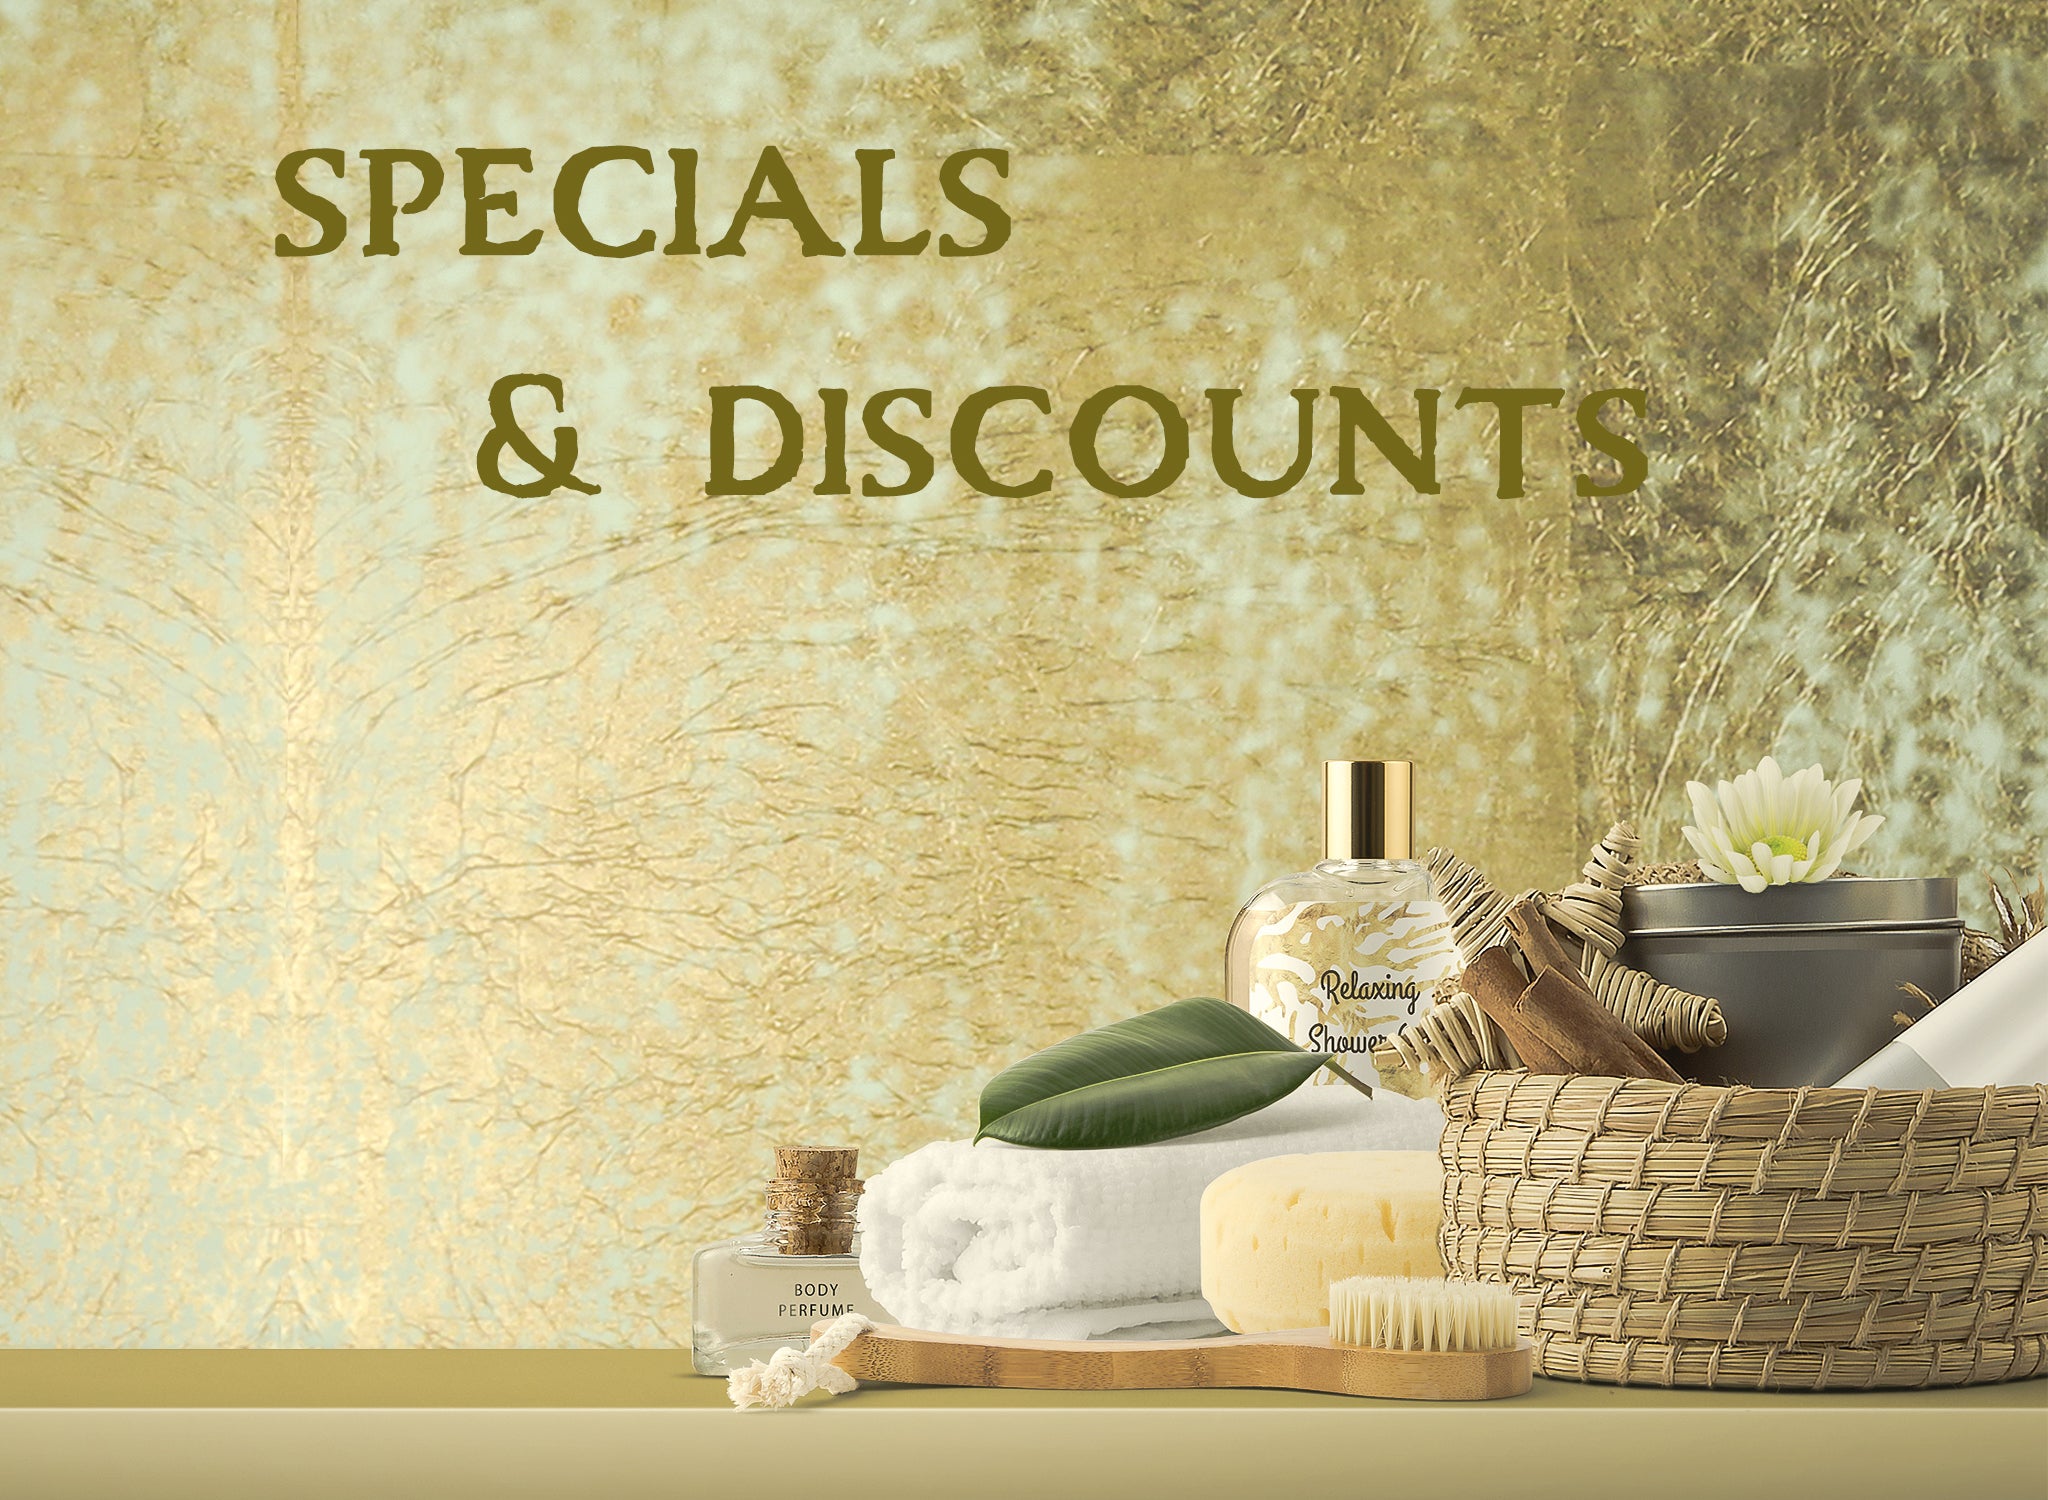 specials and discounted items at Wingsets Aromatherapy